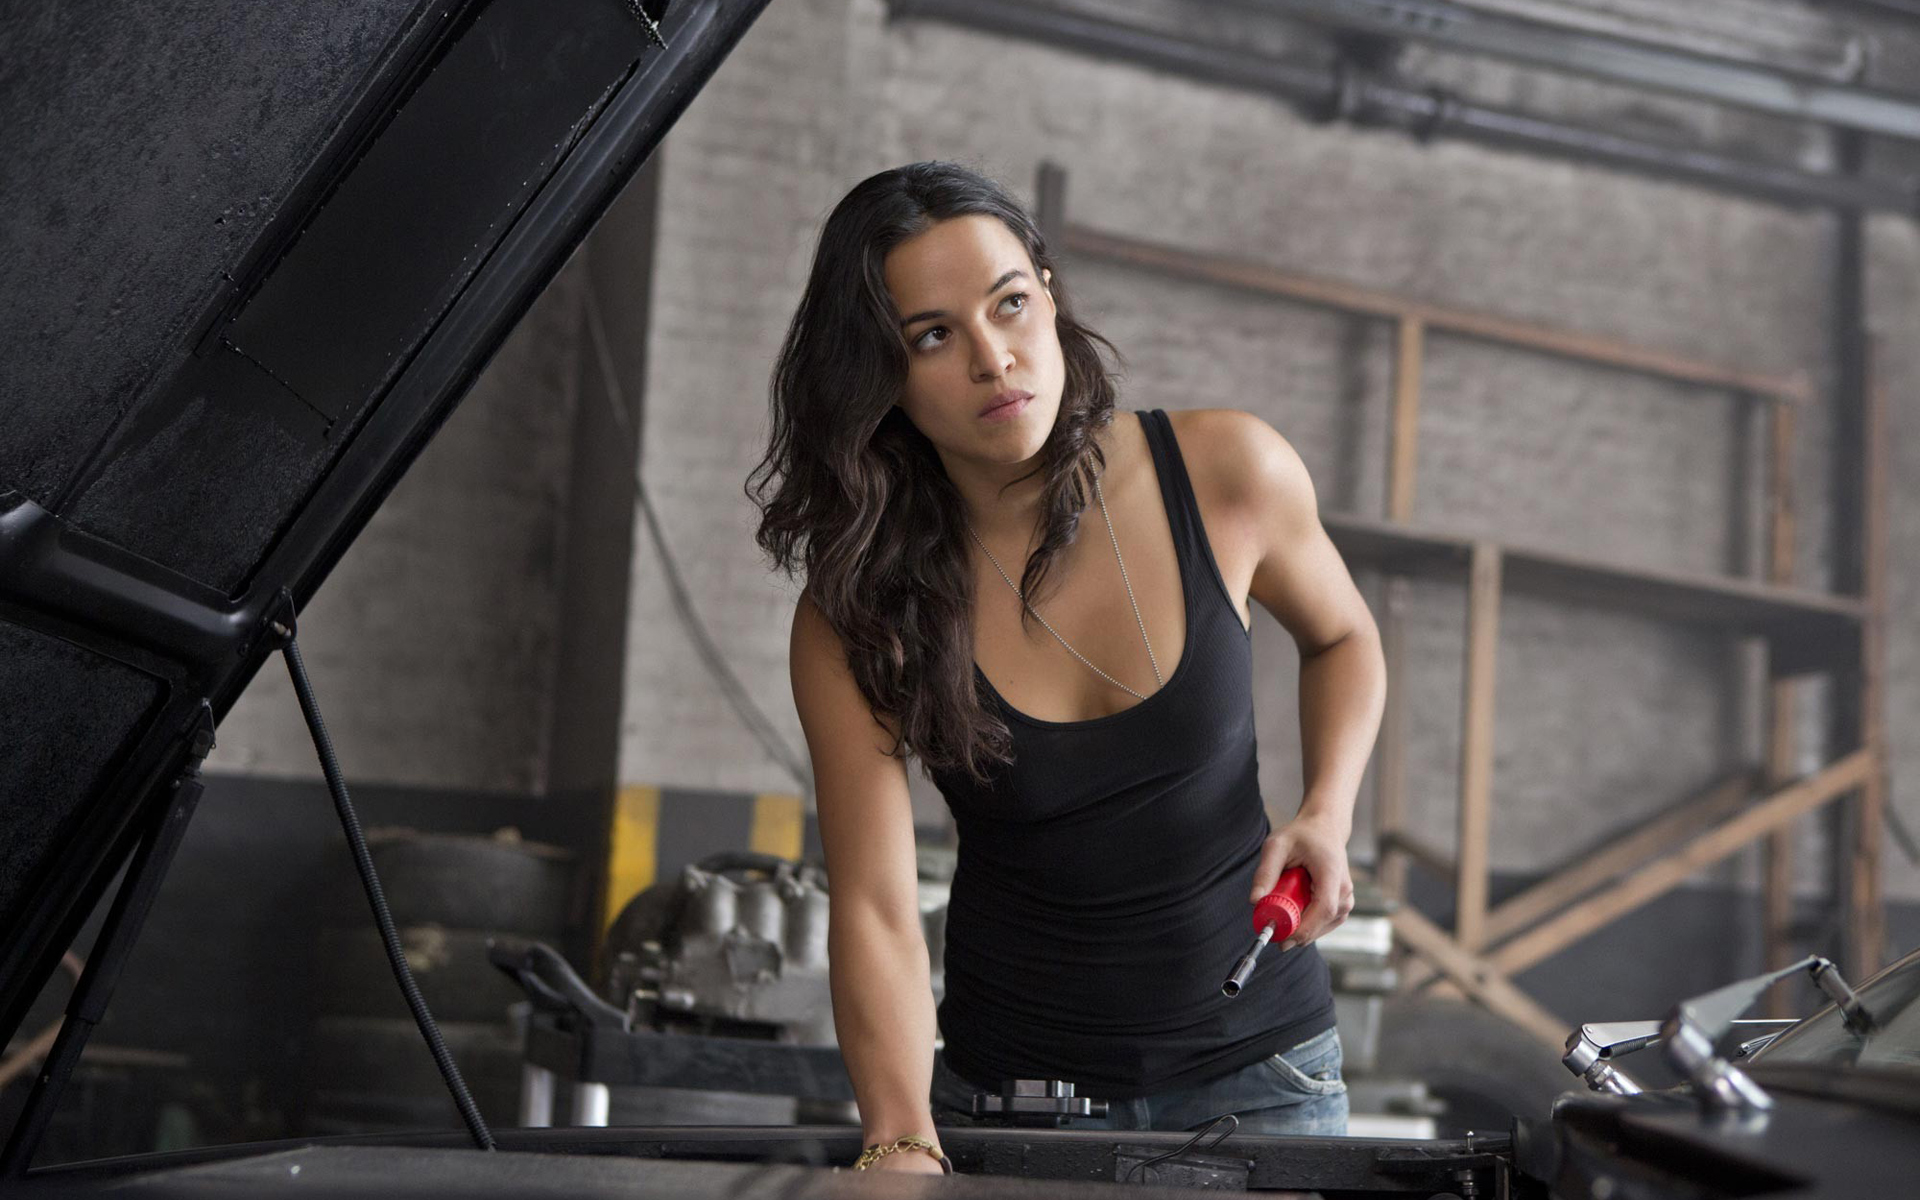 fast & furious, michelle rodriguez, fast & furious 6, movie, letty ortiz 1080p